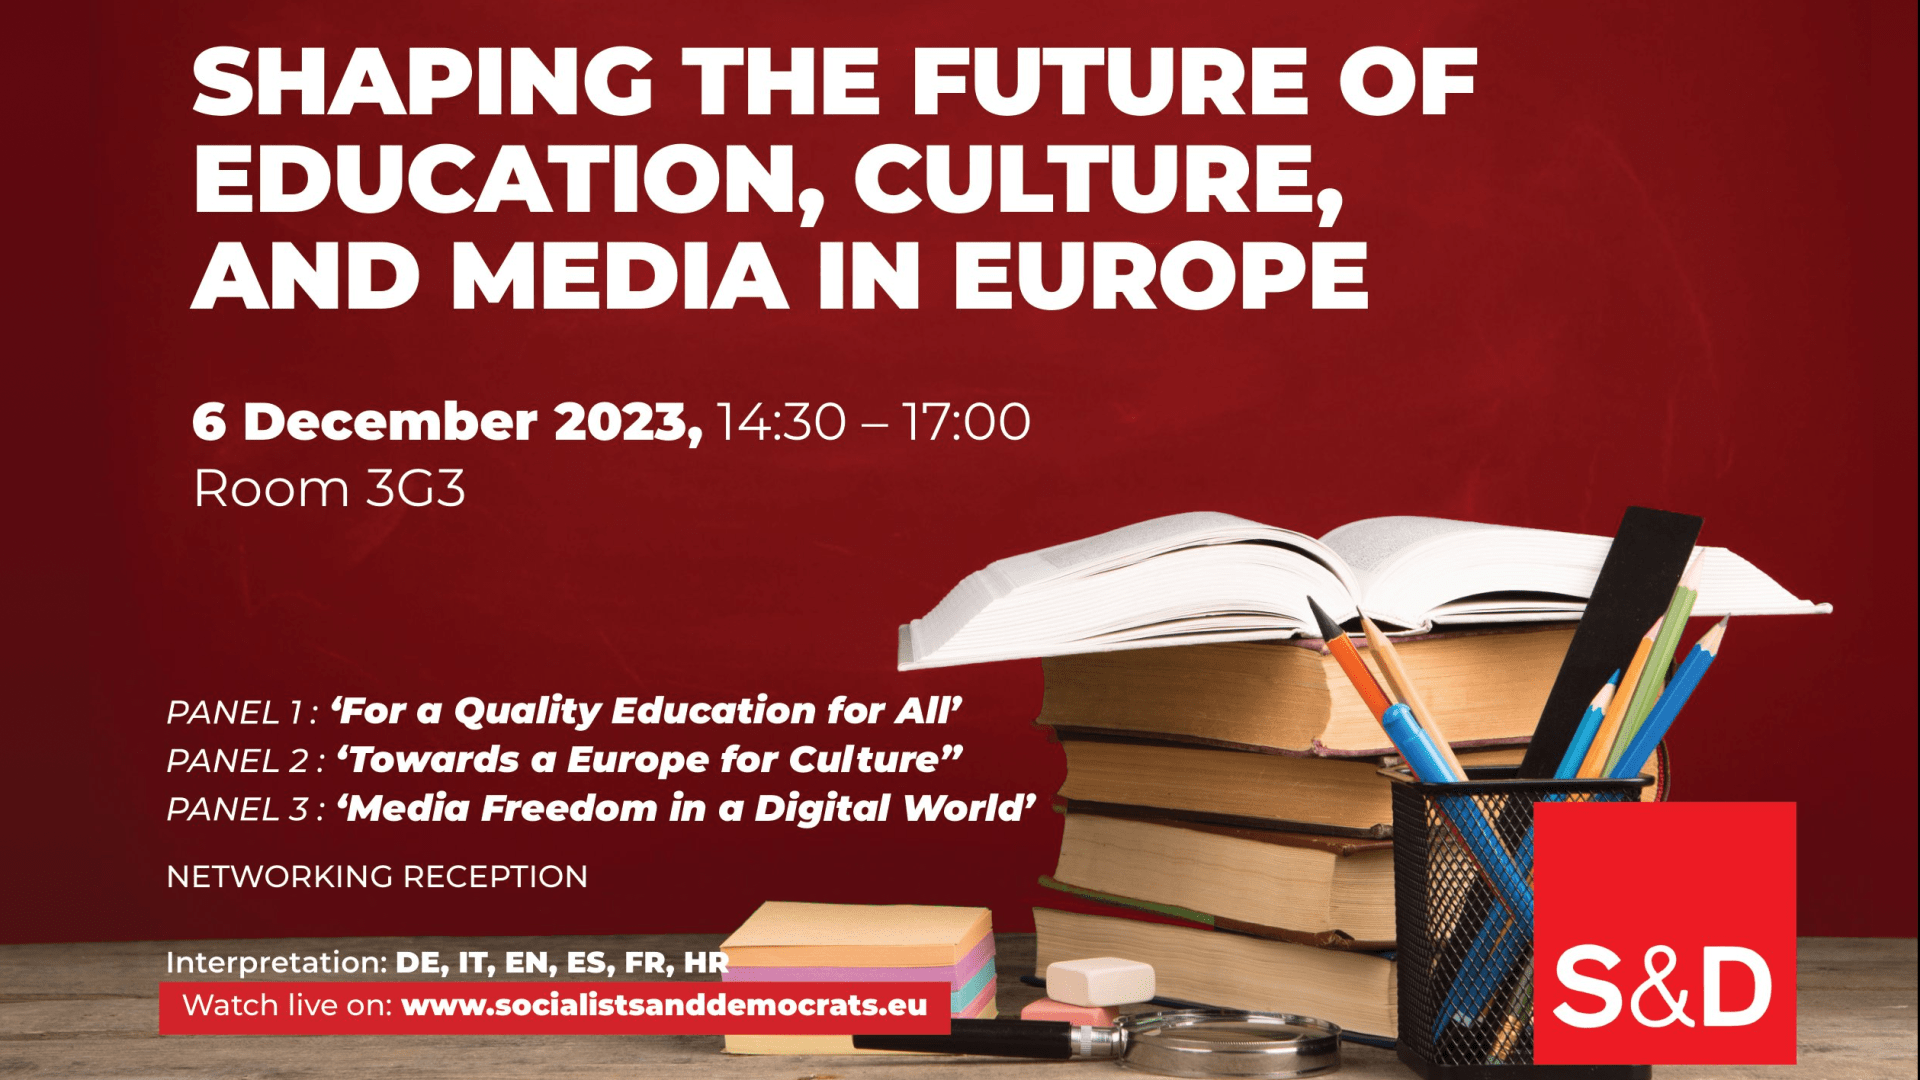 Shaping the future of education, culture and media in Europe